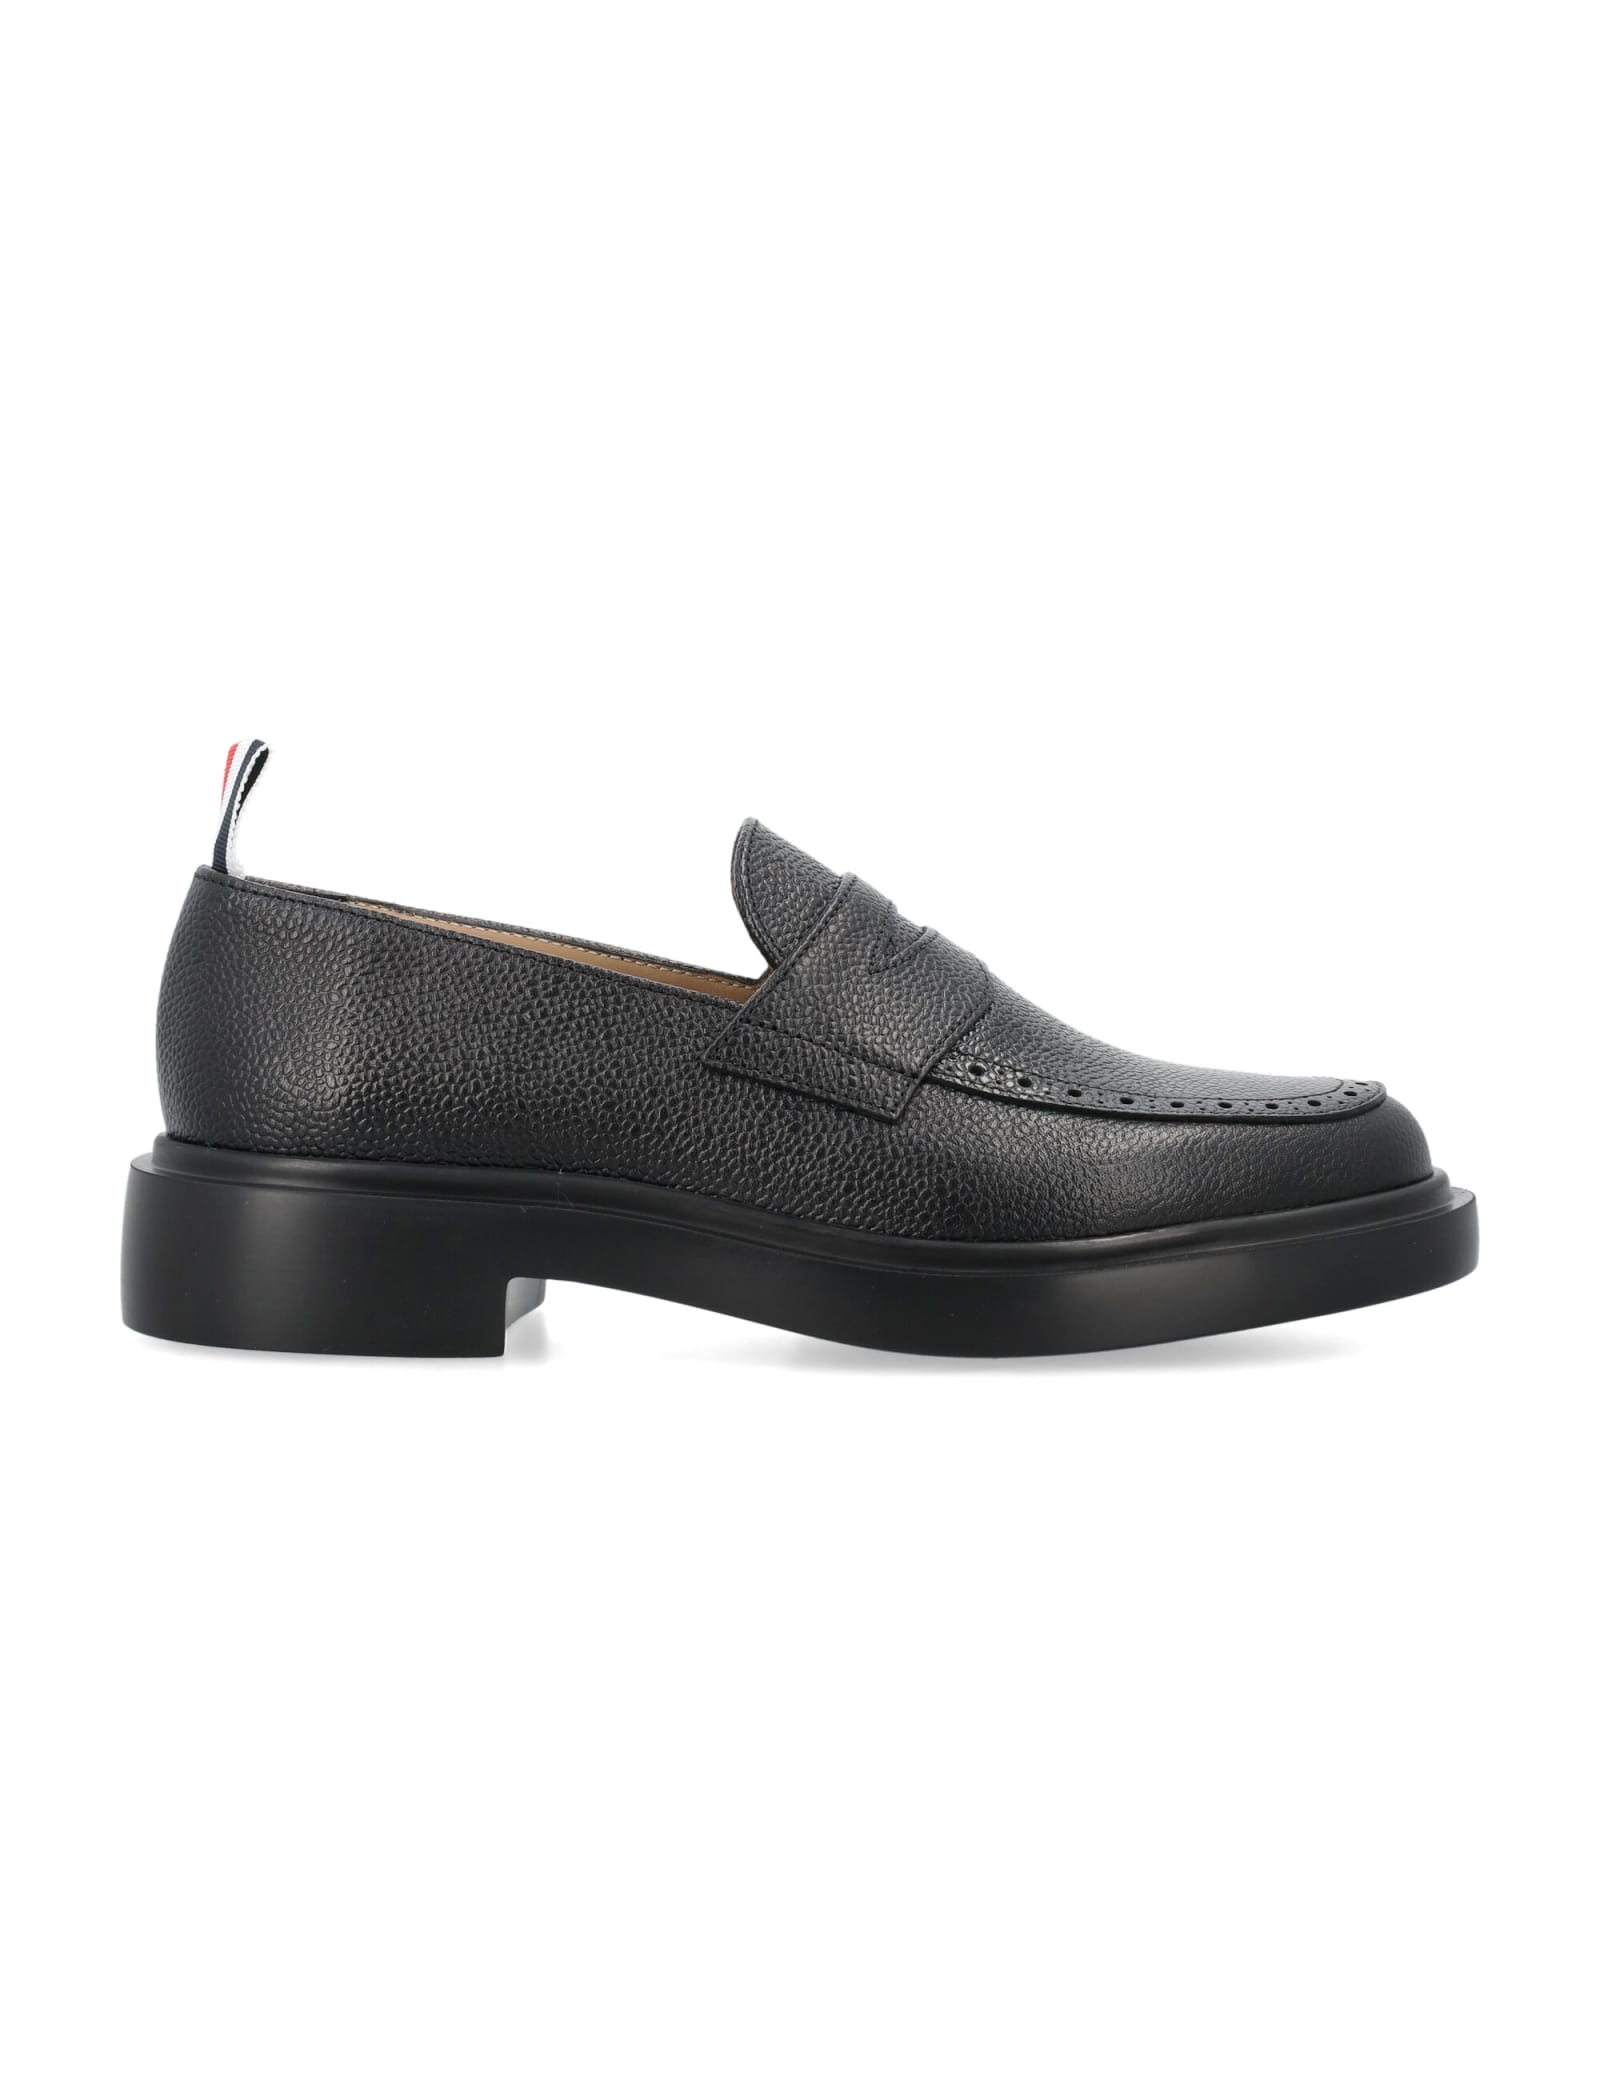 THOM BROWNE PENNY LOAFER